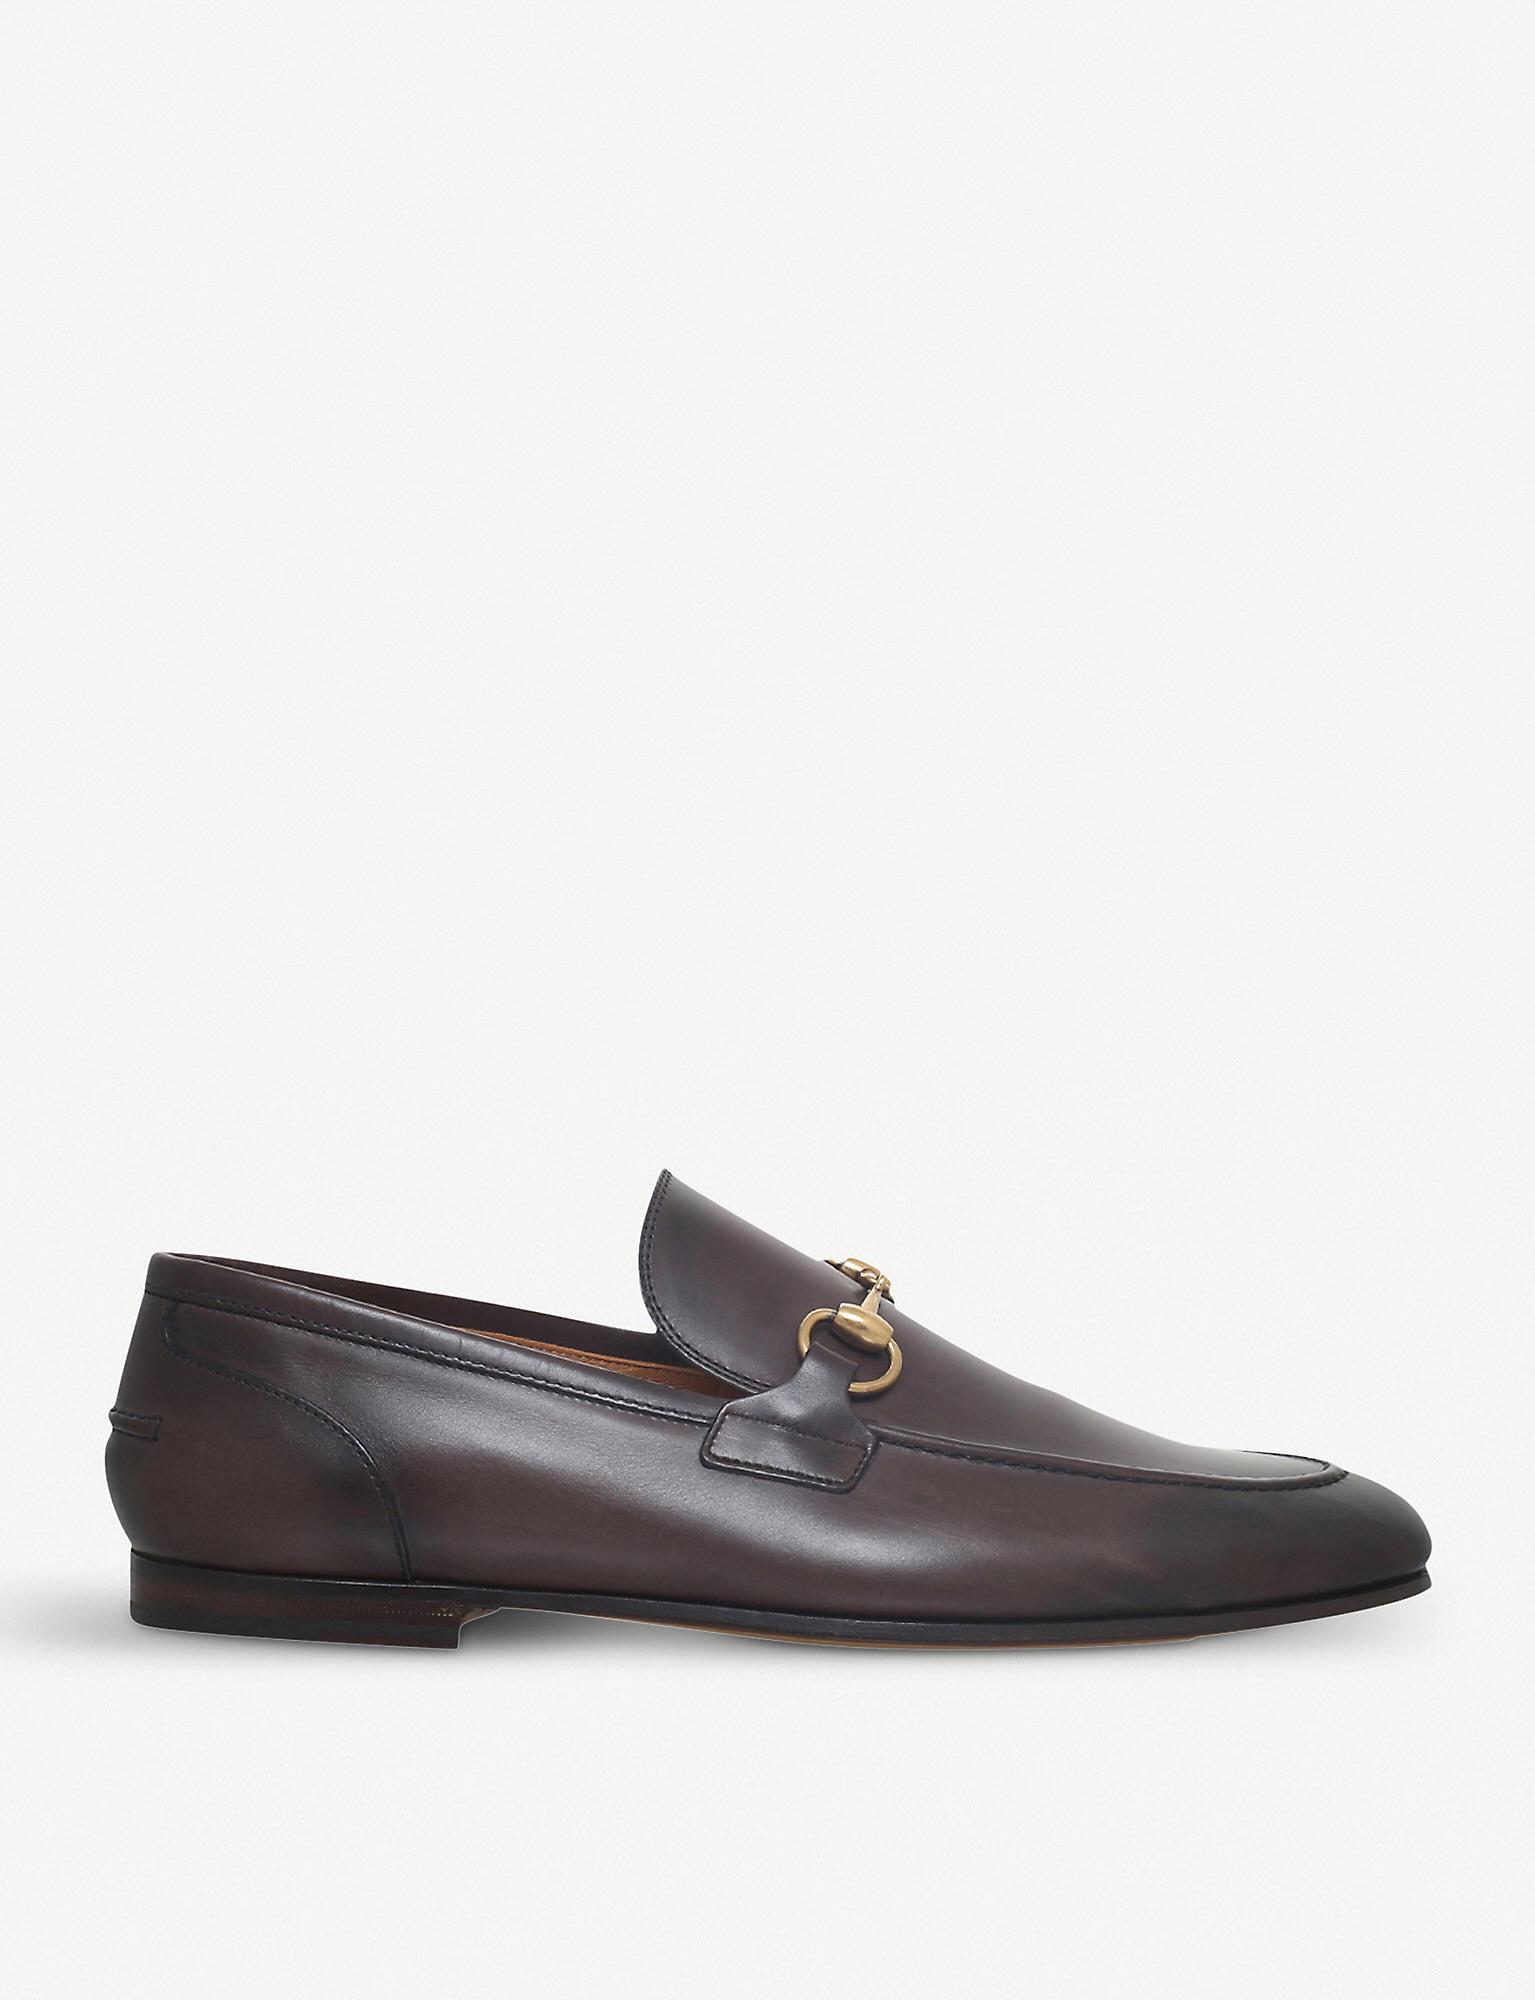 Gucci Jordaan Leather Loafers in Brown for Men - Lyst